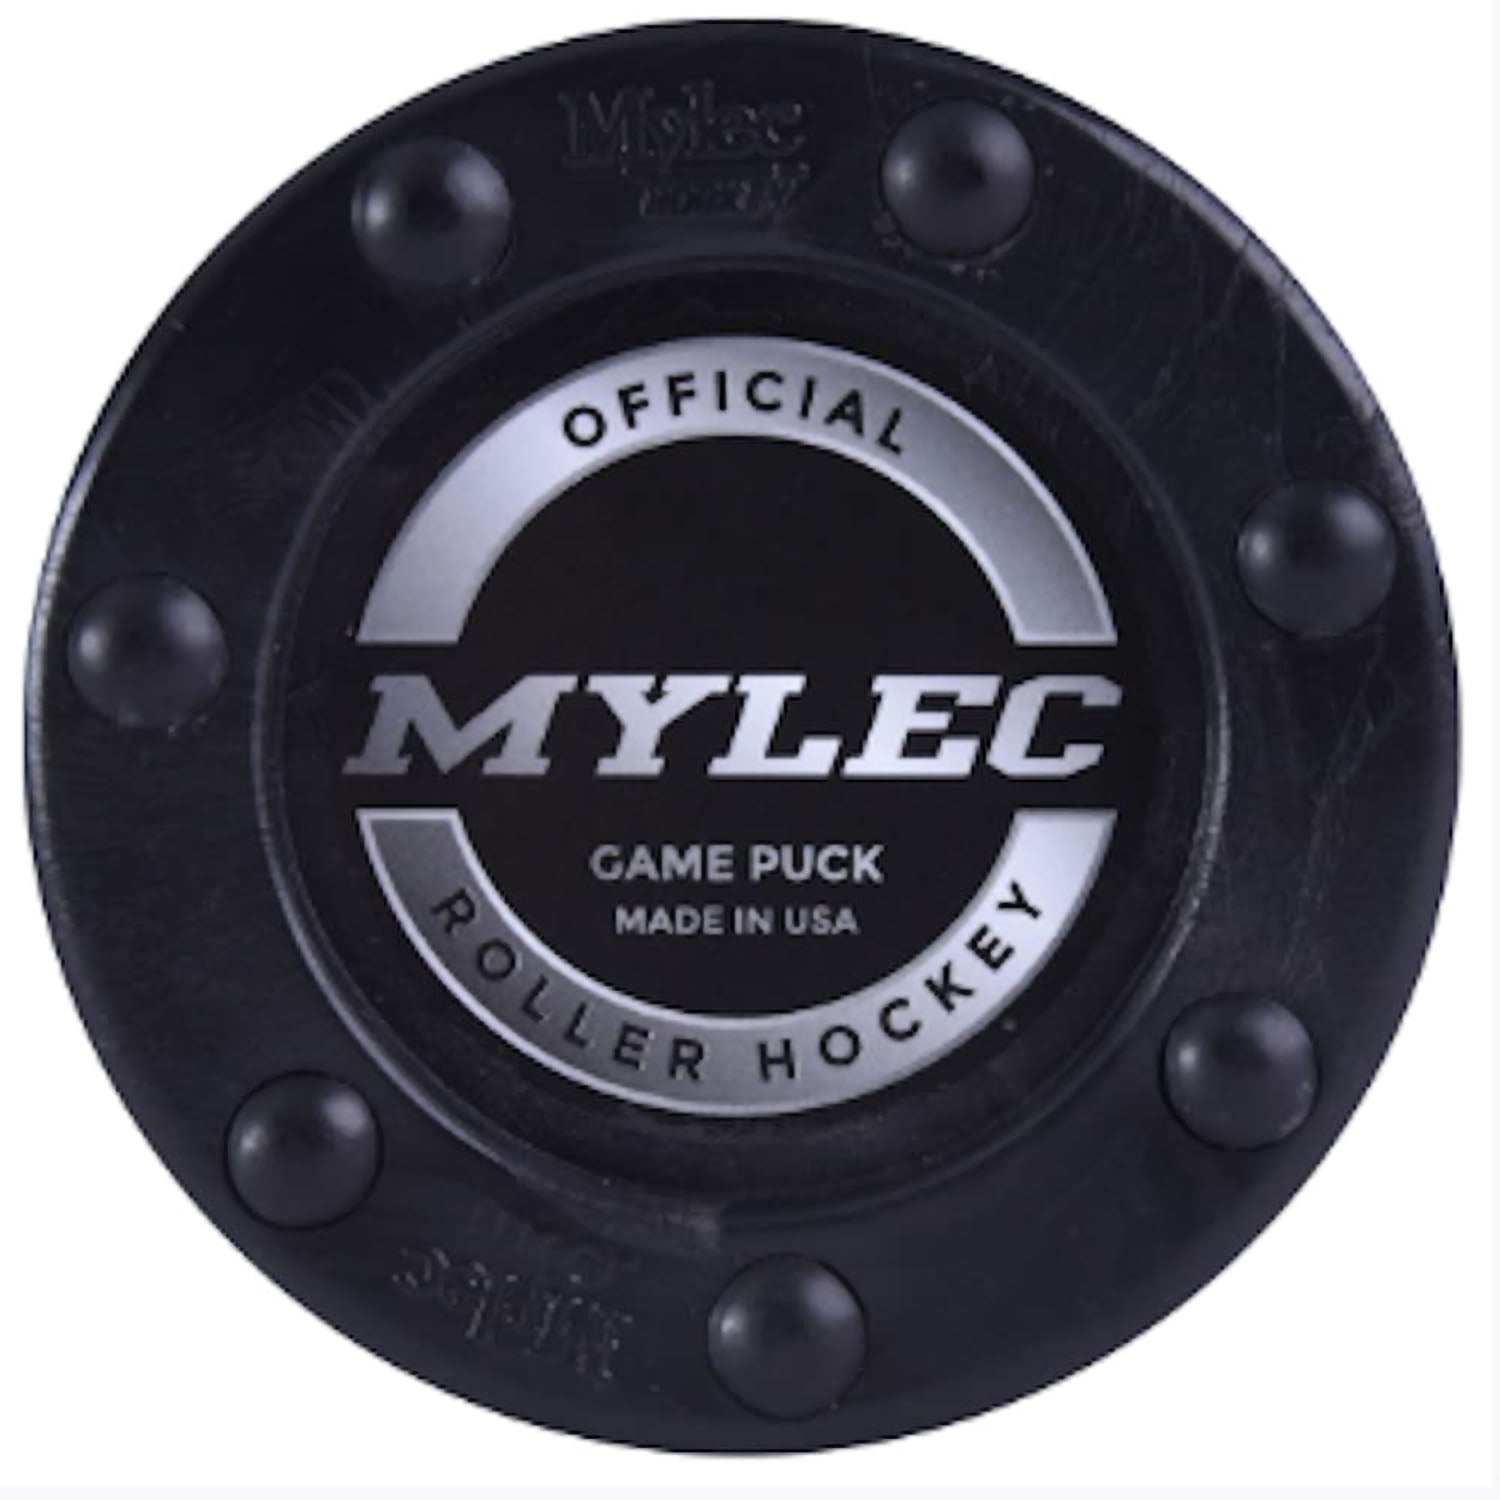 Mylec Official Roller Hockey Game Puck - 3 Pack - Pro-Distributing